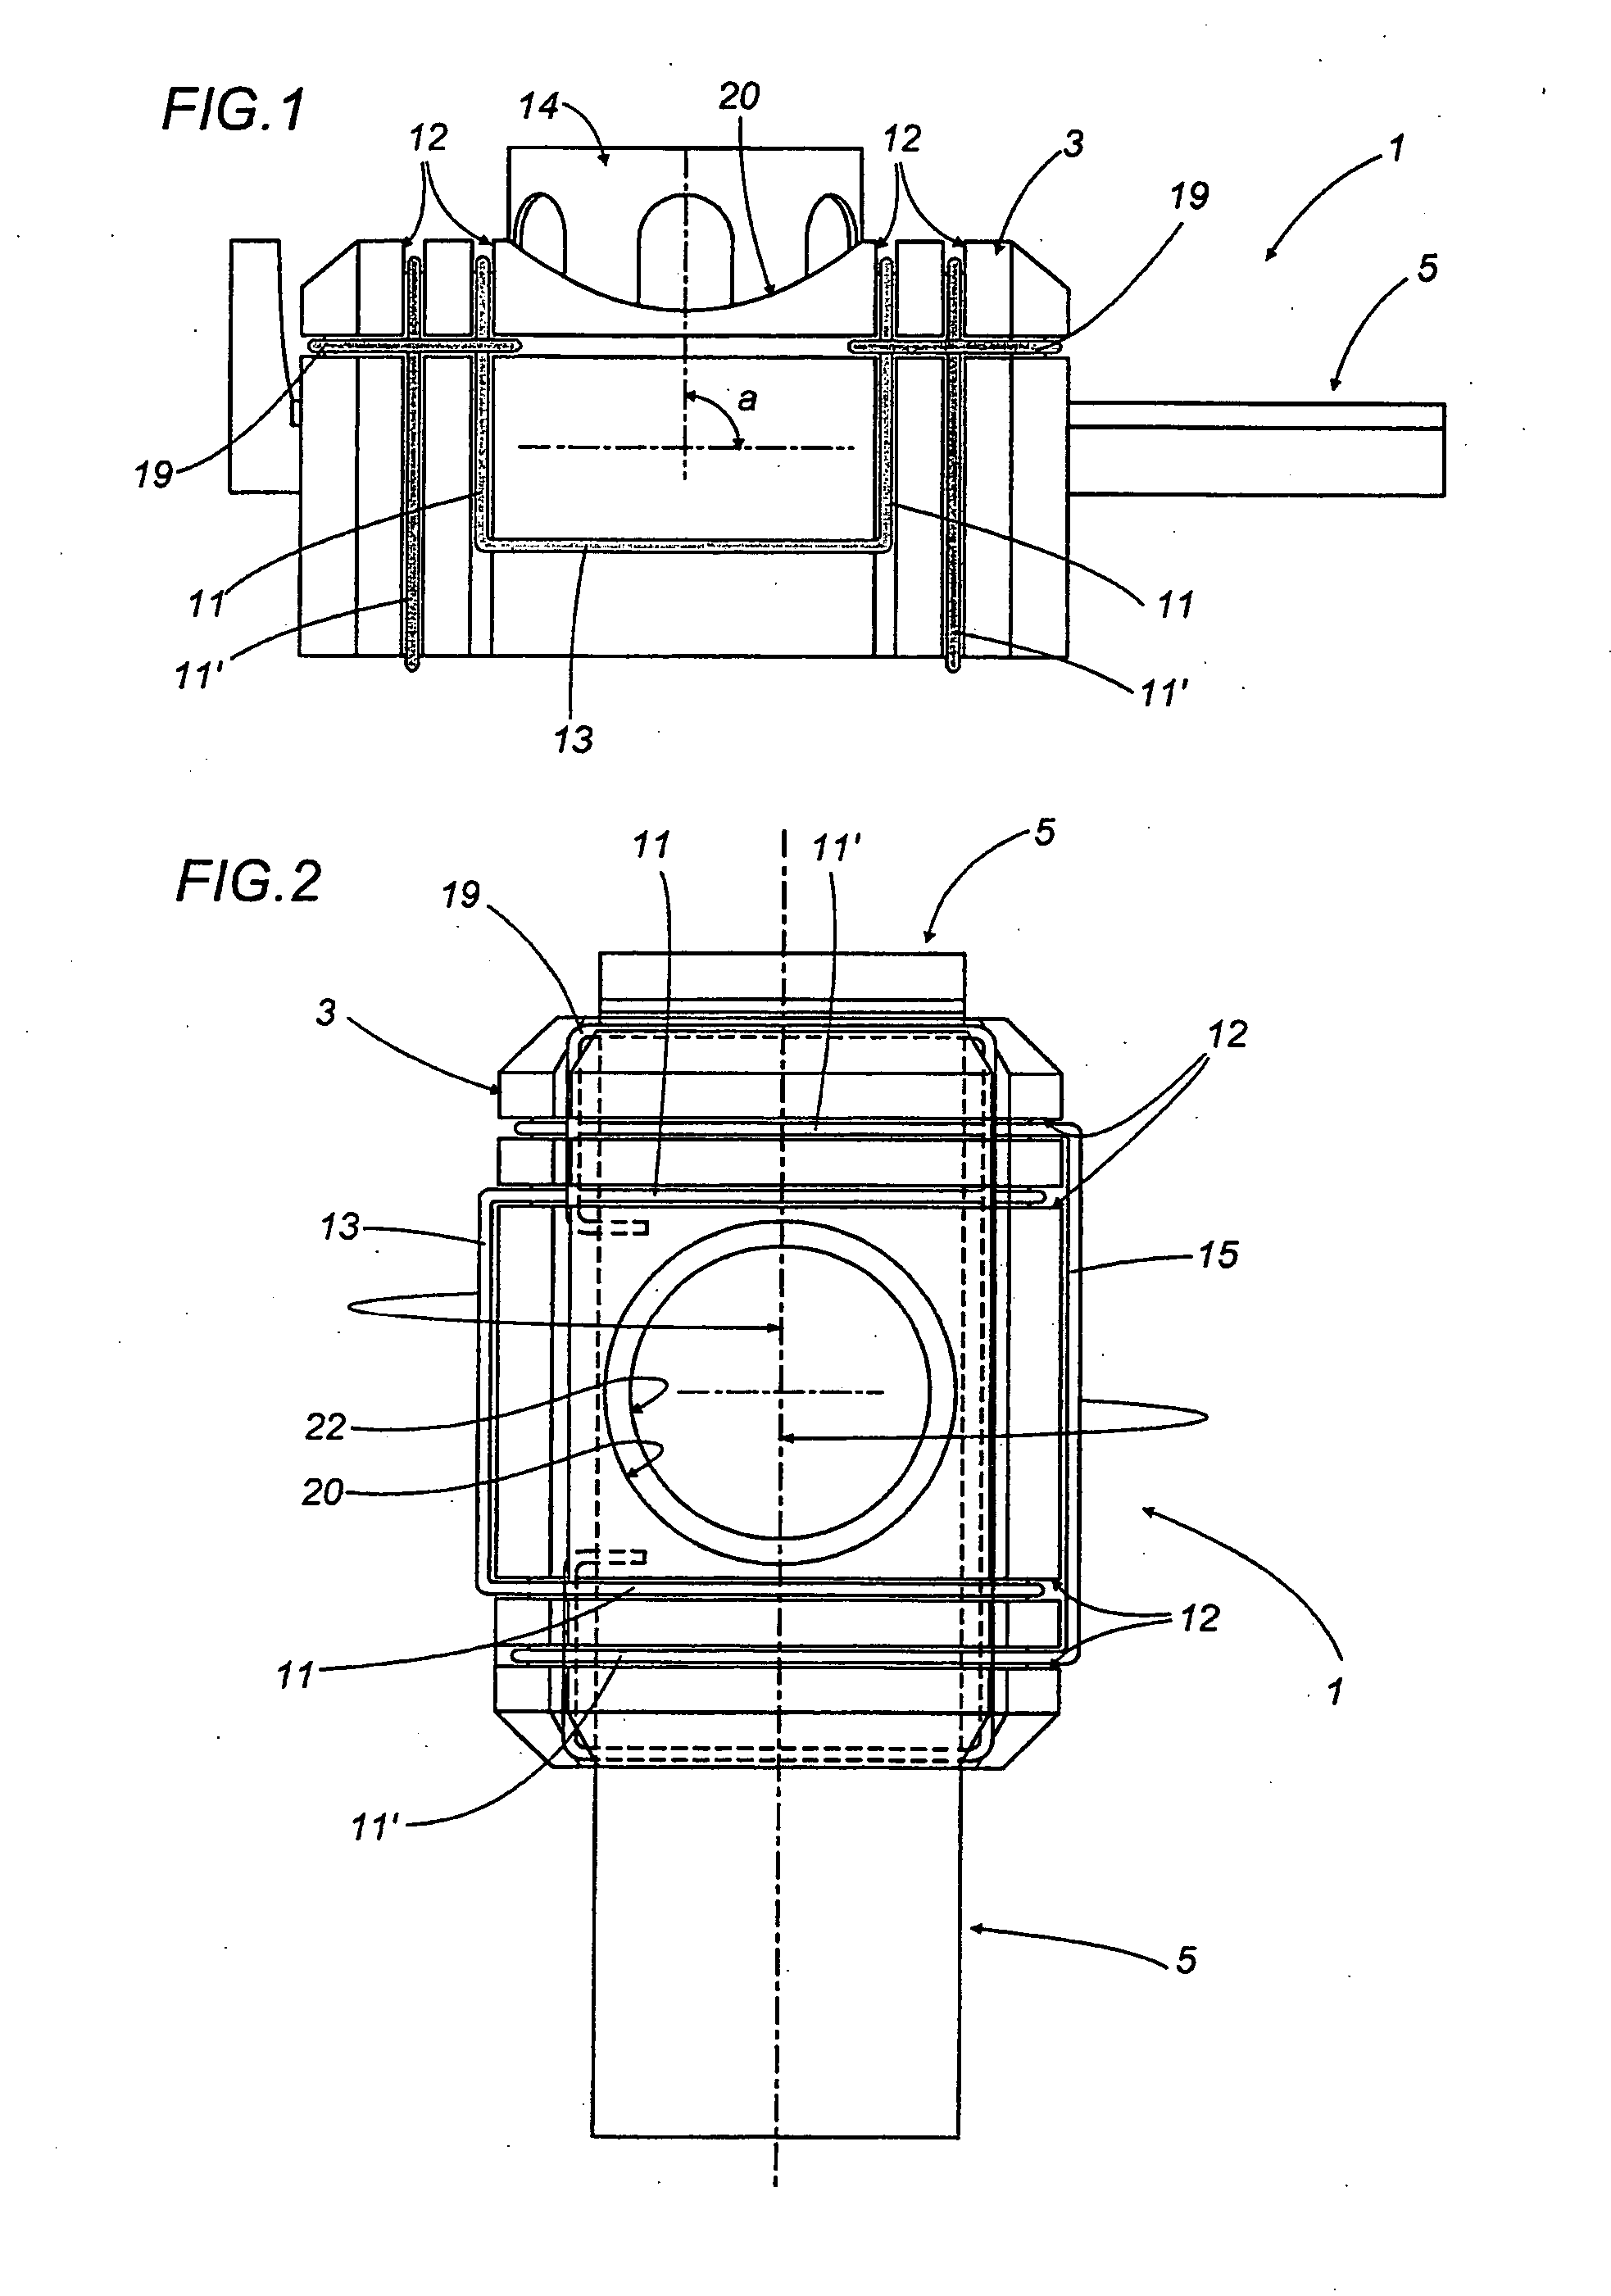 Device for end-to-side anastomosis